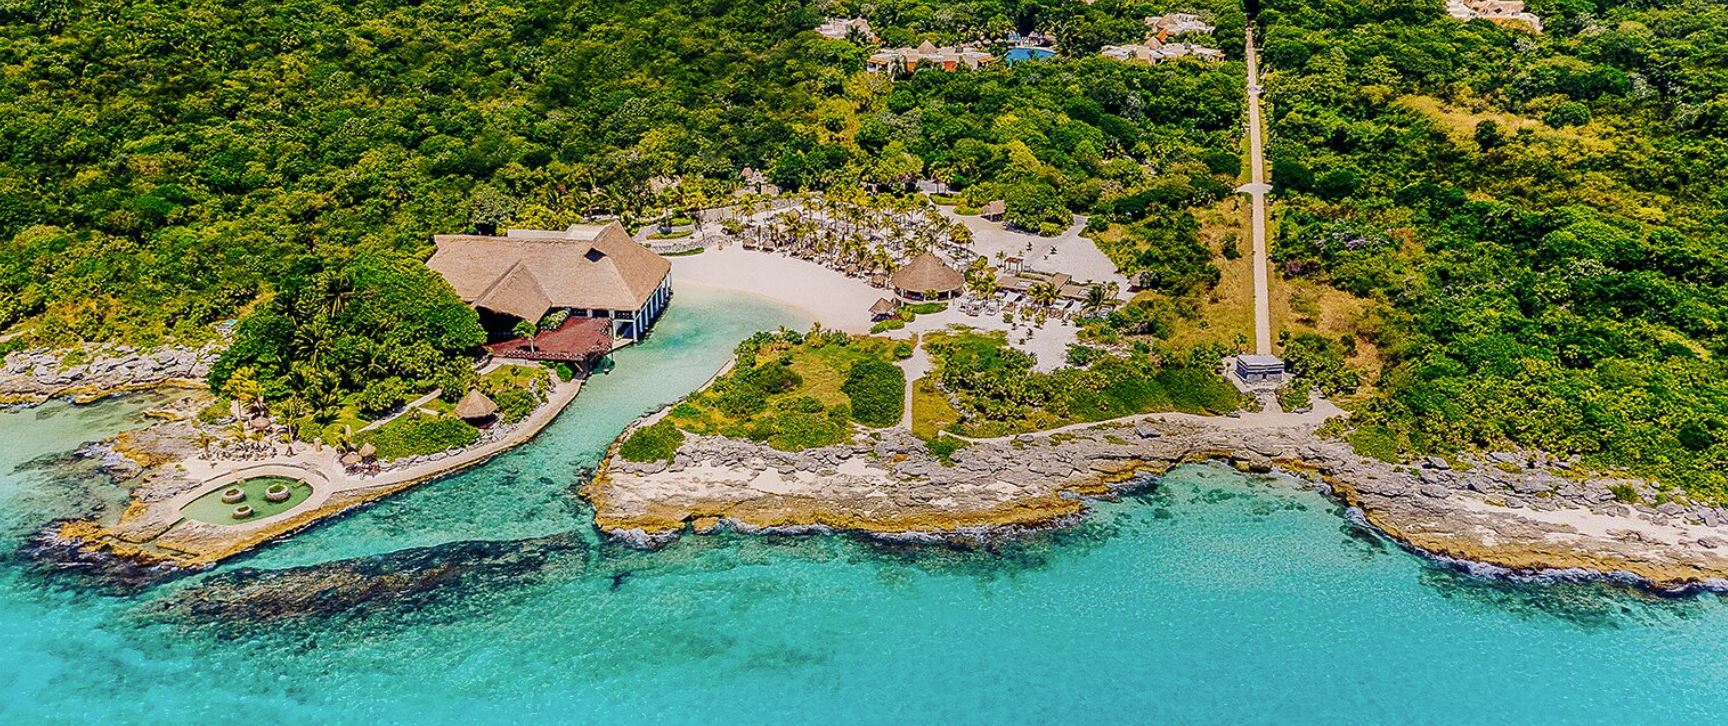 The Occidental at Xcaret Destination